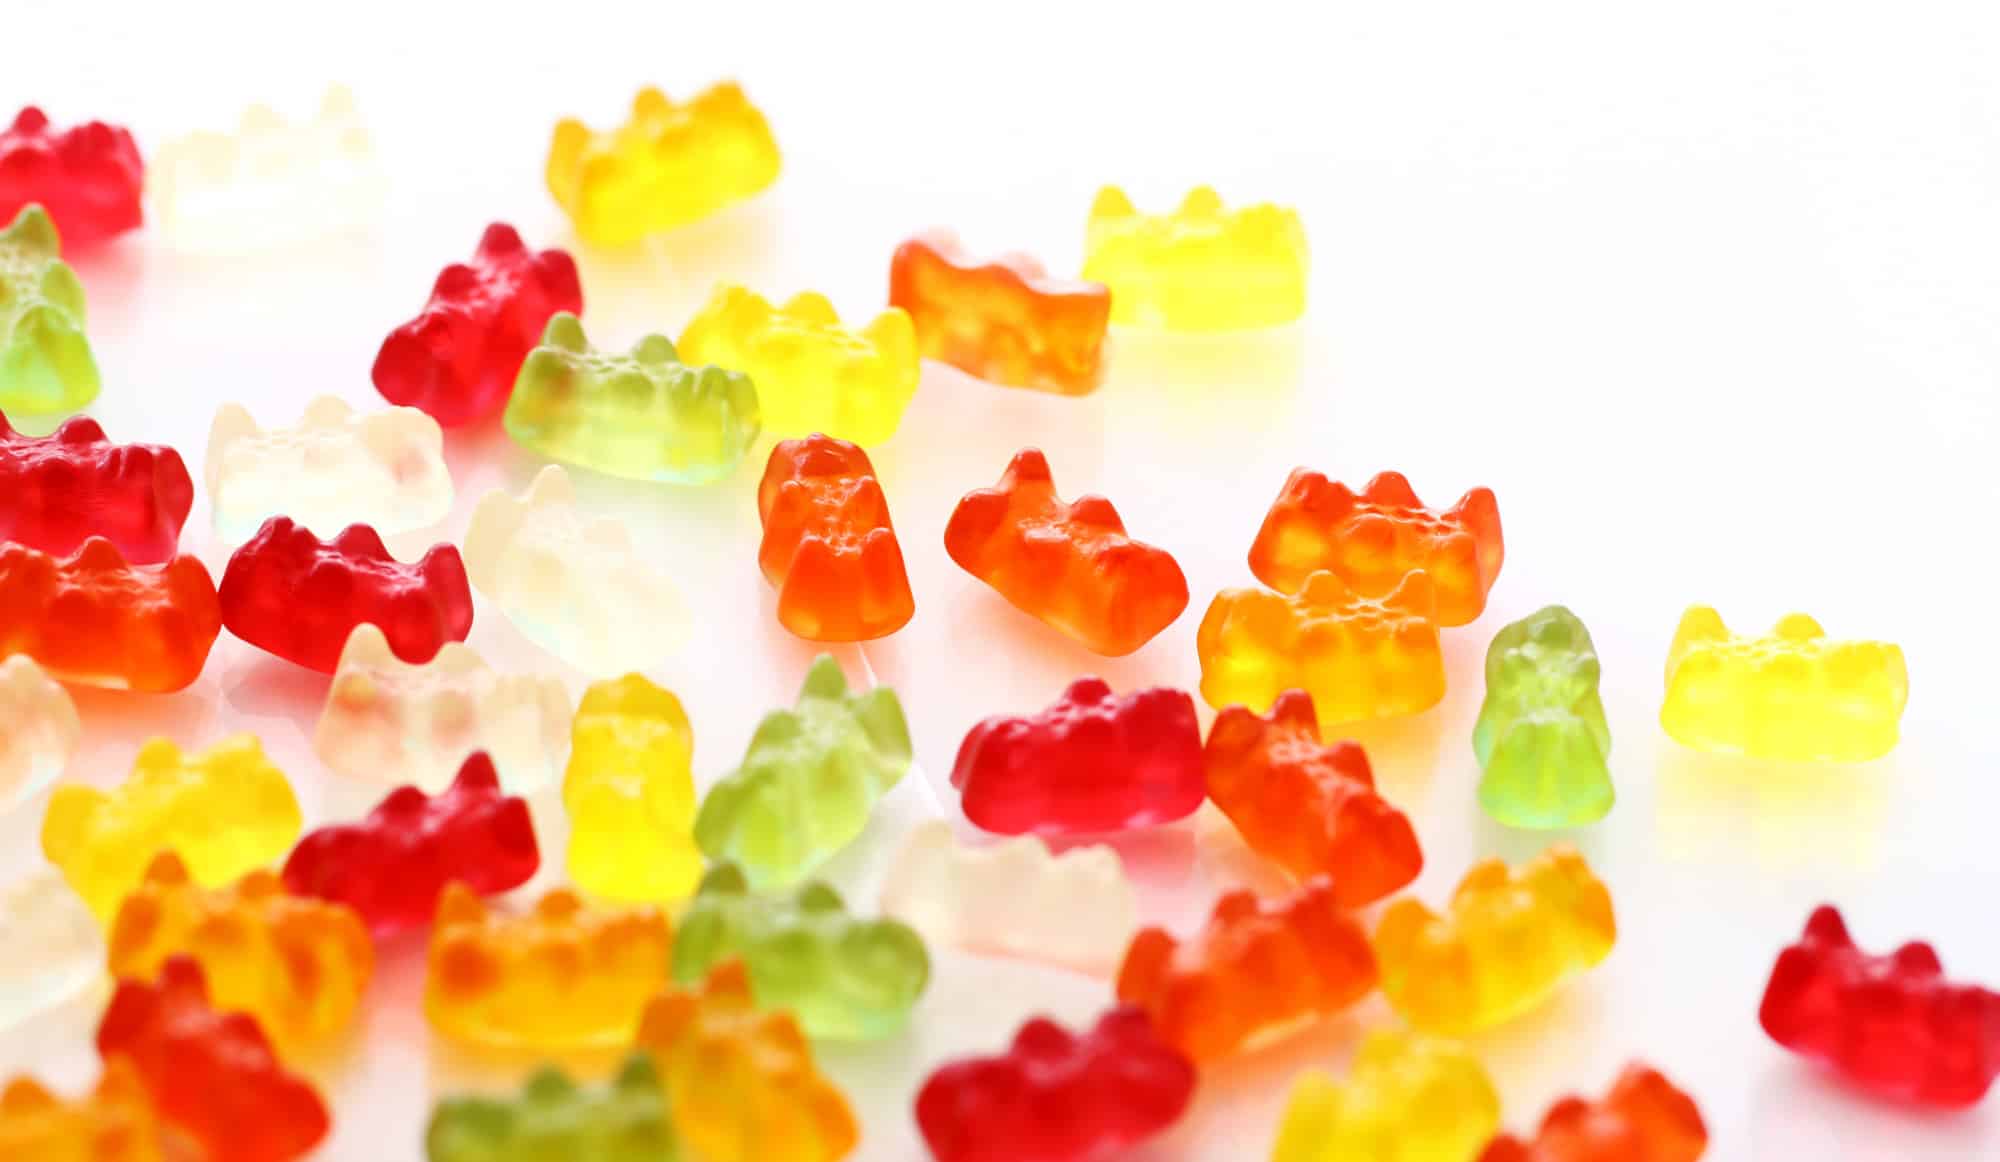 What Should I Look Out For When Purchasing CBD Gummies?